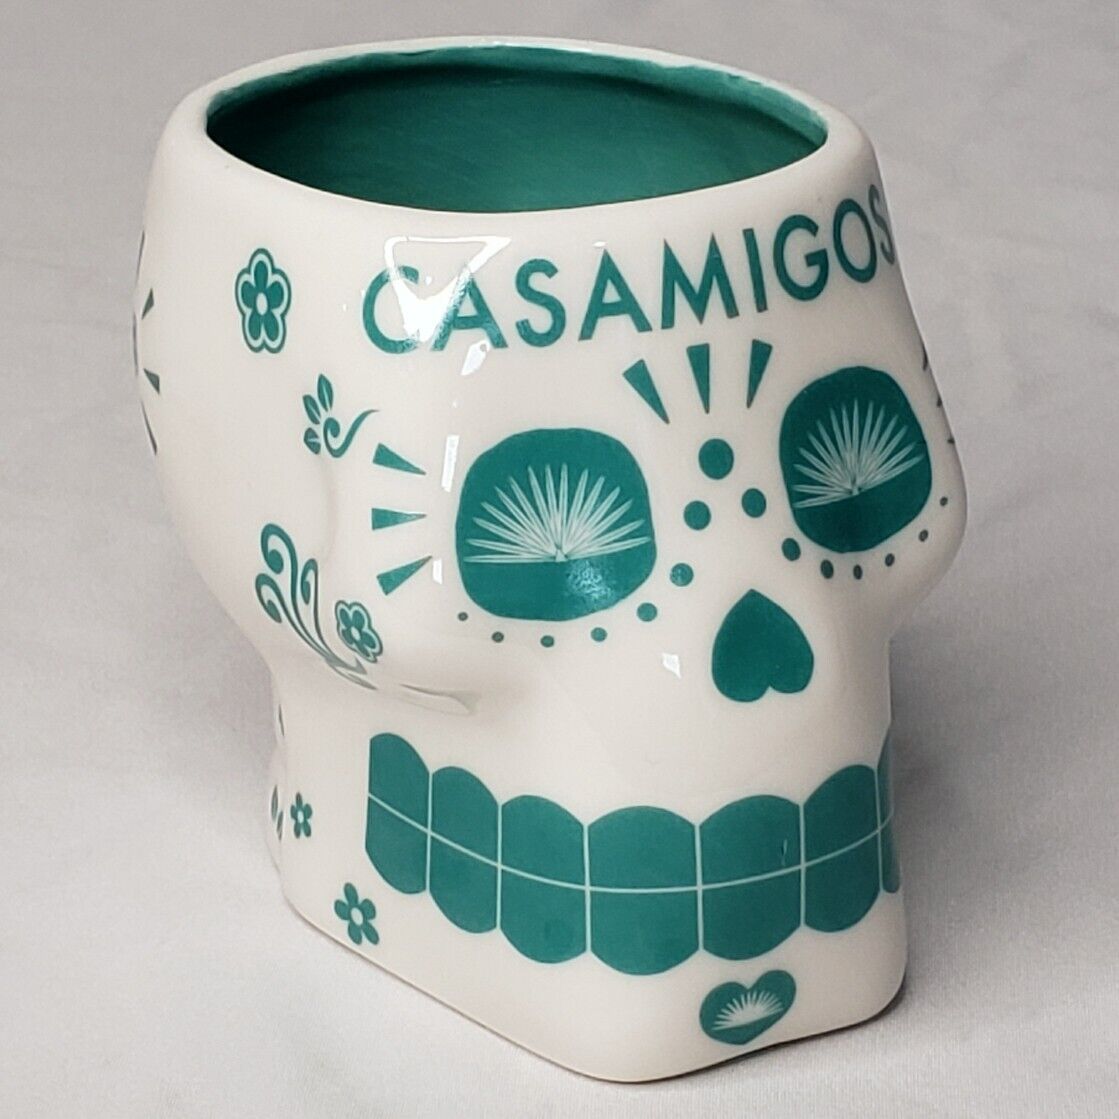 Casamigos Skull Tequila Ceramic Teal Bar Mug - Day Of The Dead - George Clooney